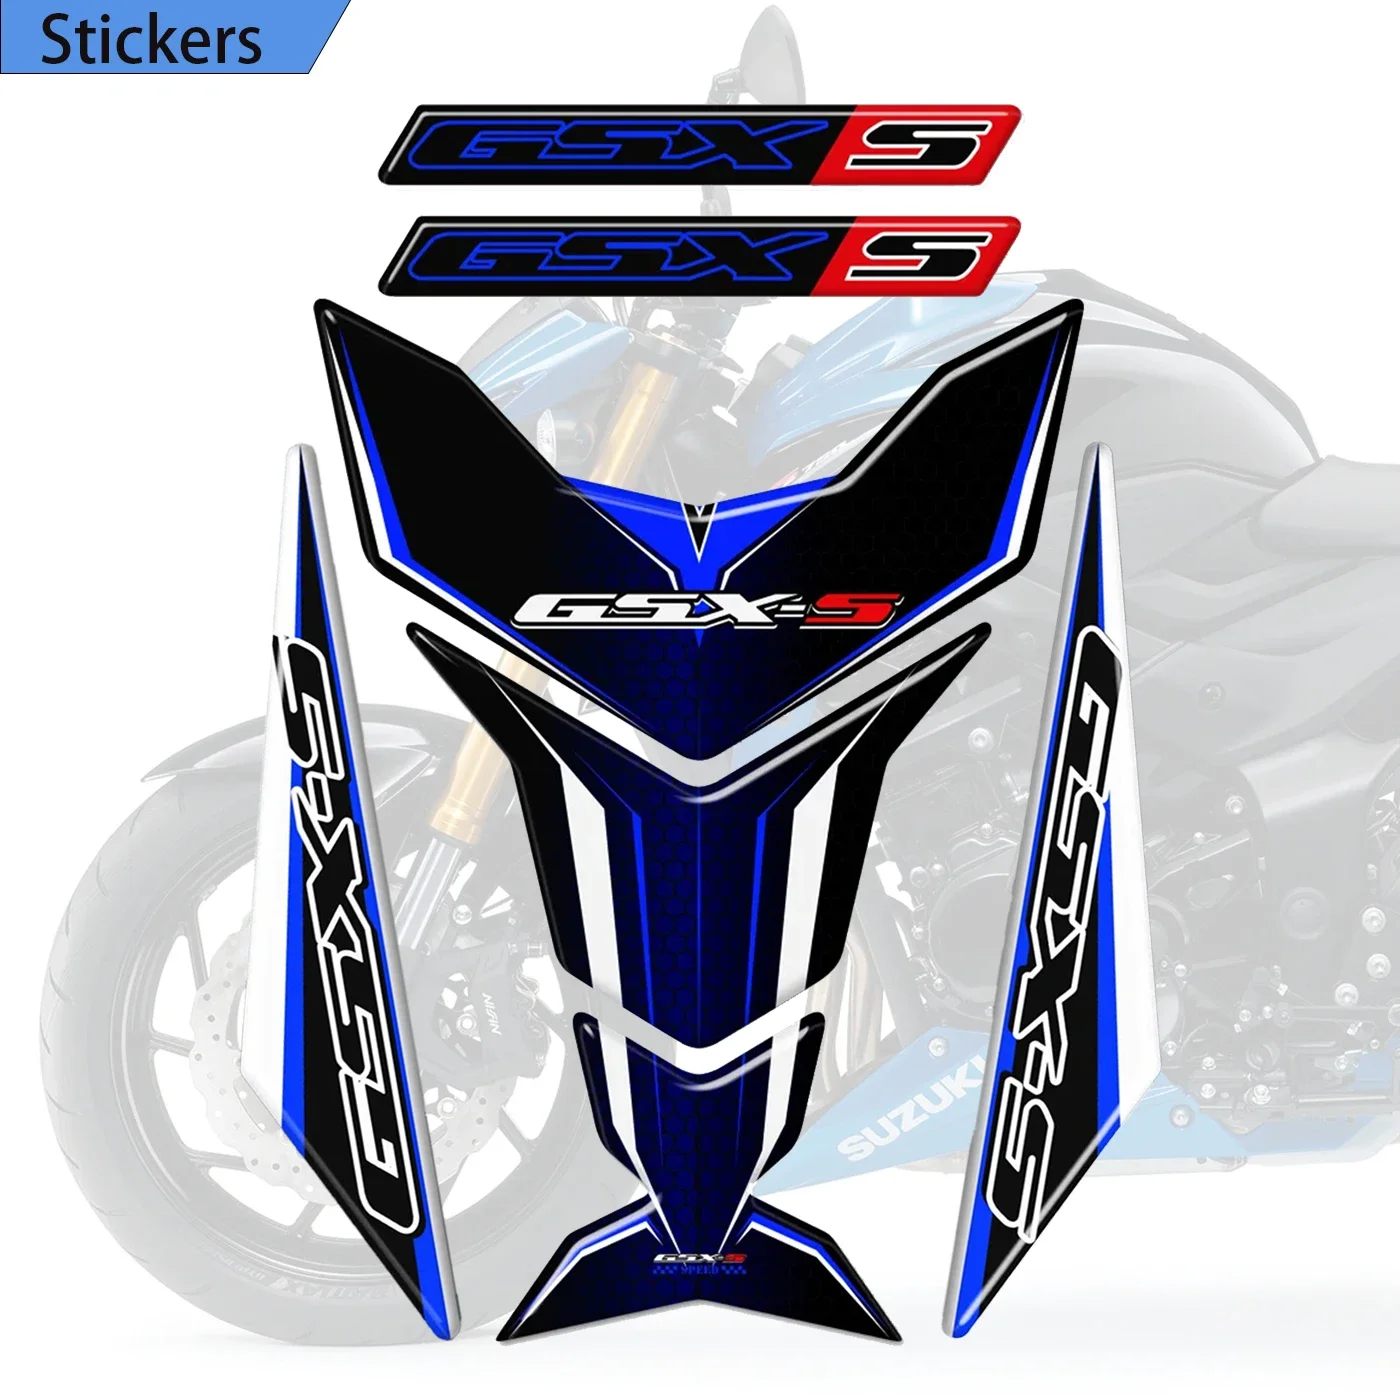 GSX S125 S750 S1000 750 1000 For Suzuki  Tank Pad Protector Stickers Decals Fender Protection